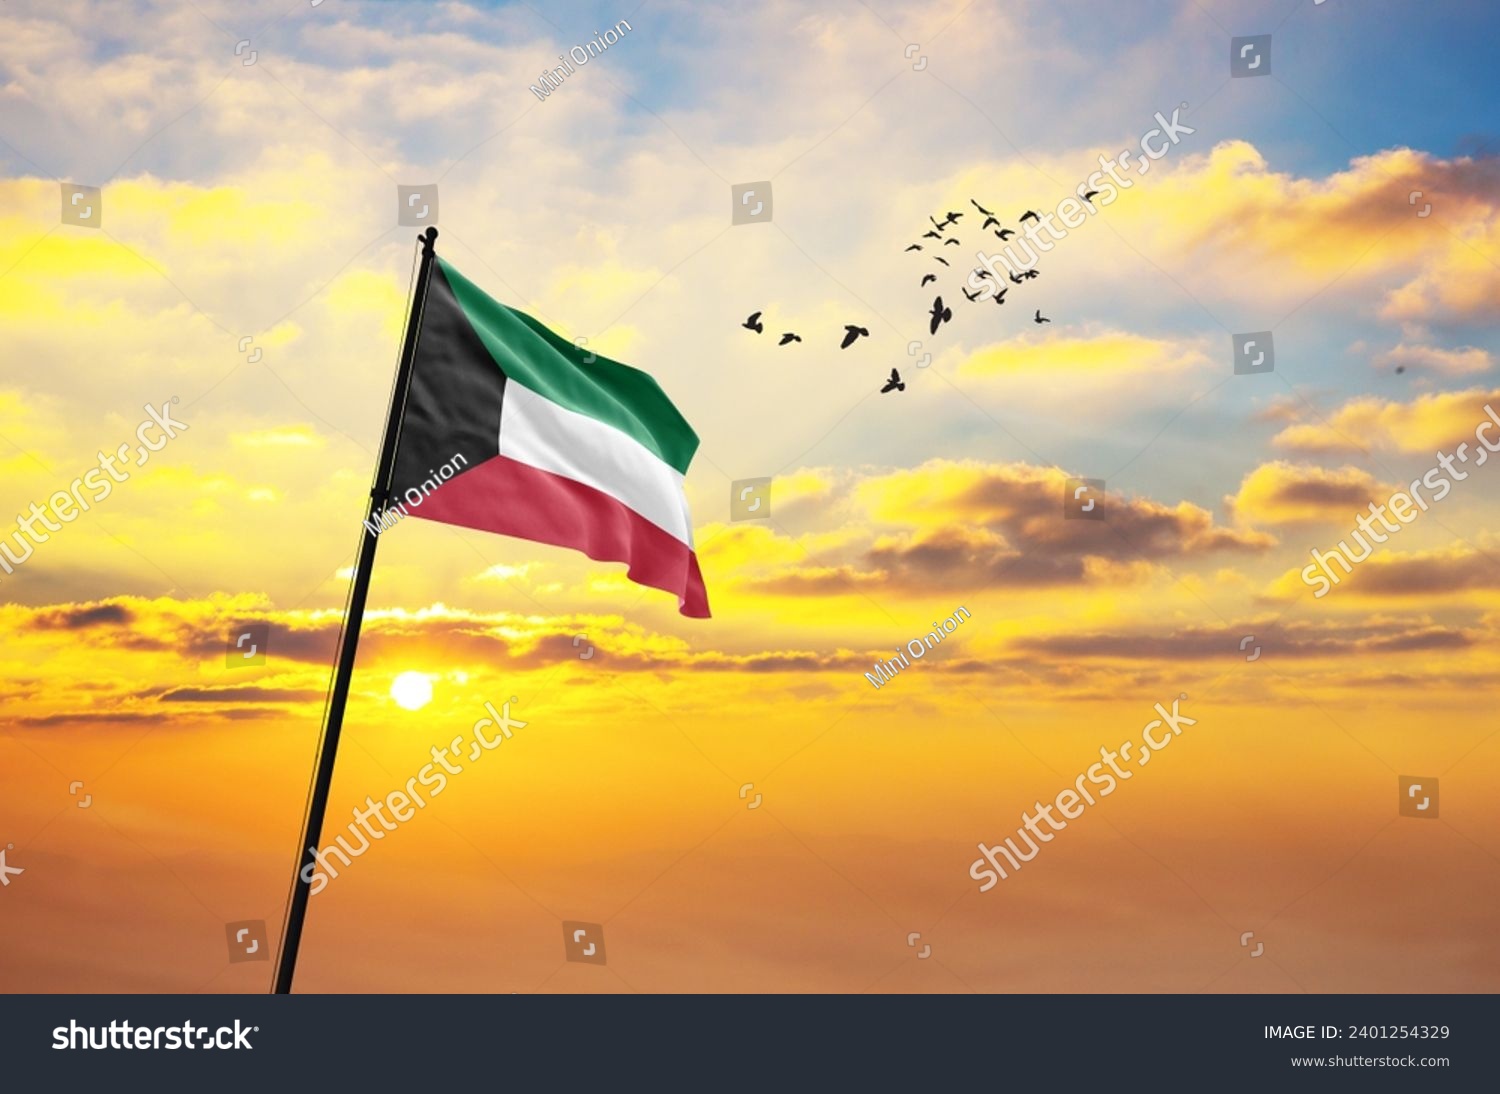 Waving flag of Kuwait against the background of a sunset or sunrise. Kuwait flag for Independence Day. The symbol of the state on wavy fabric. #2401254329